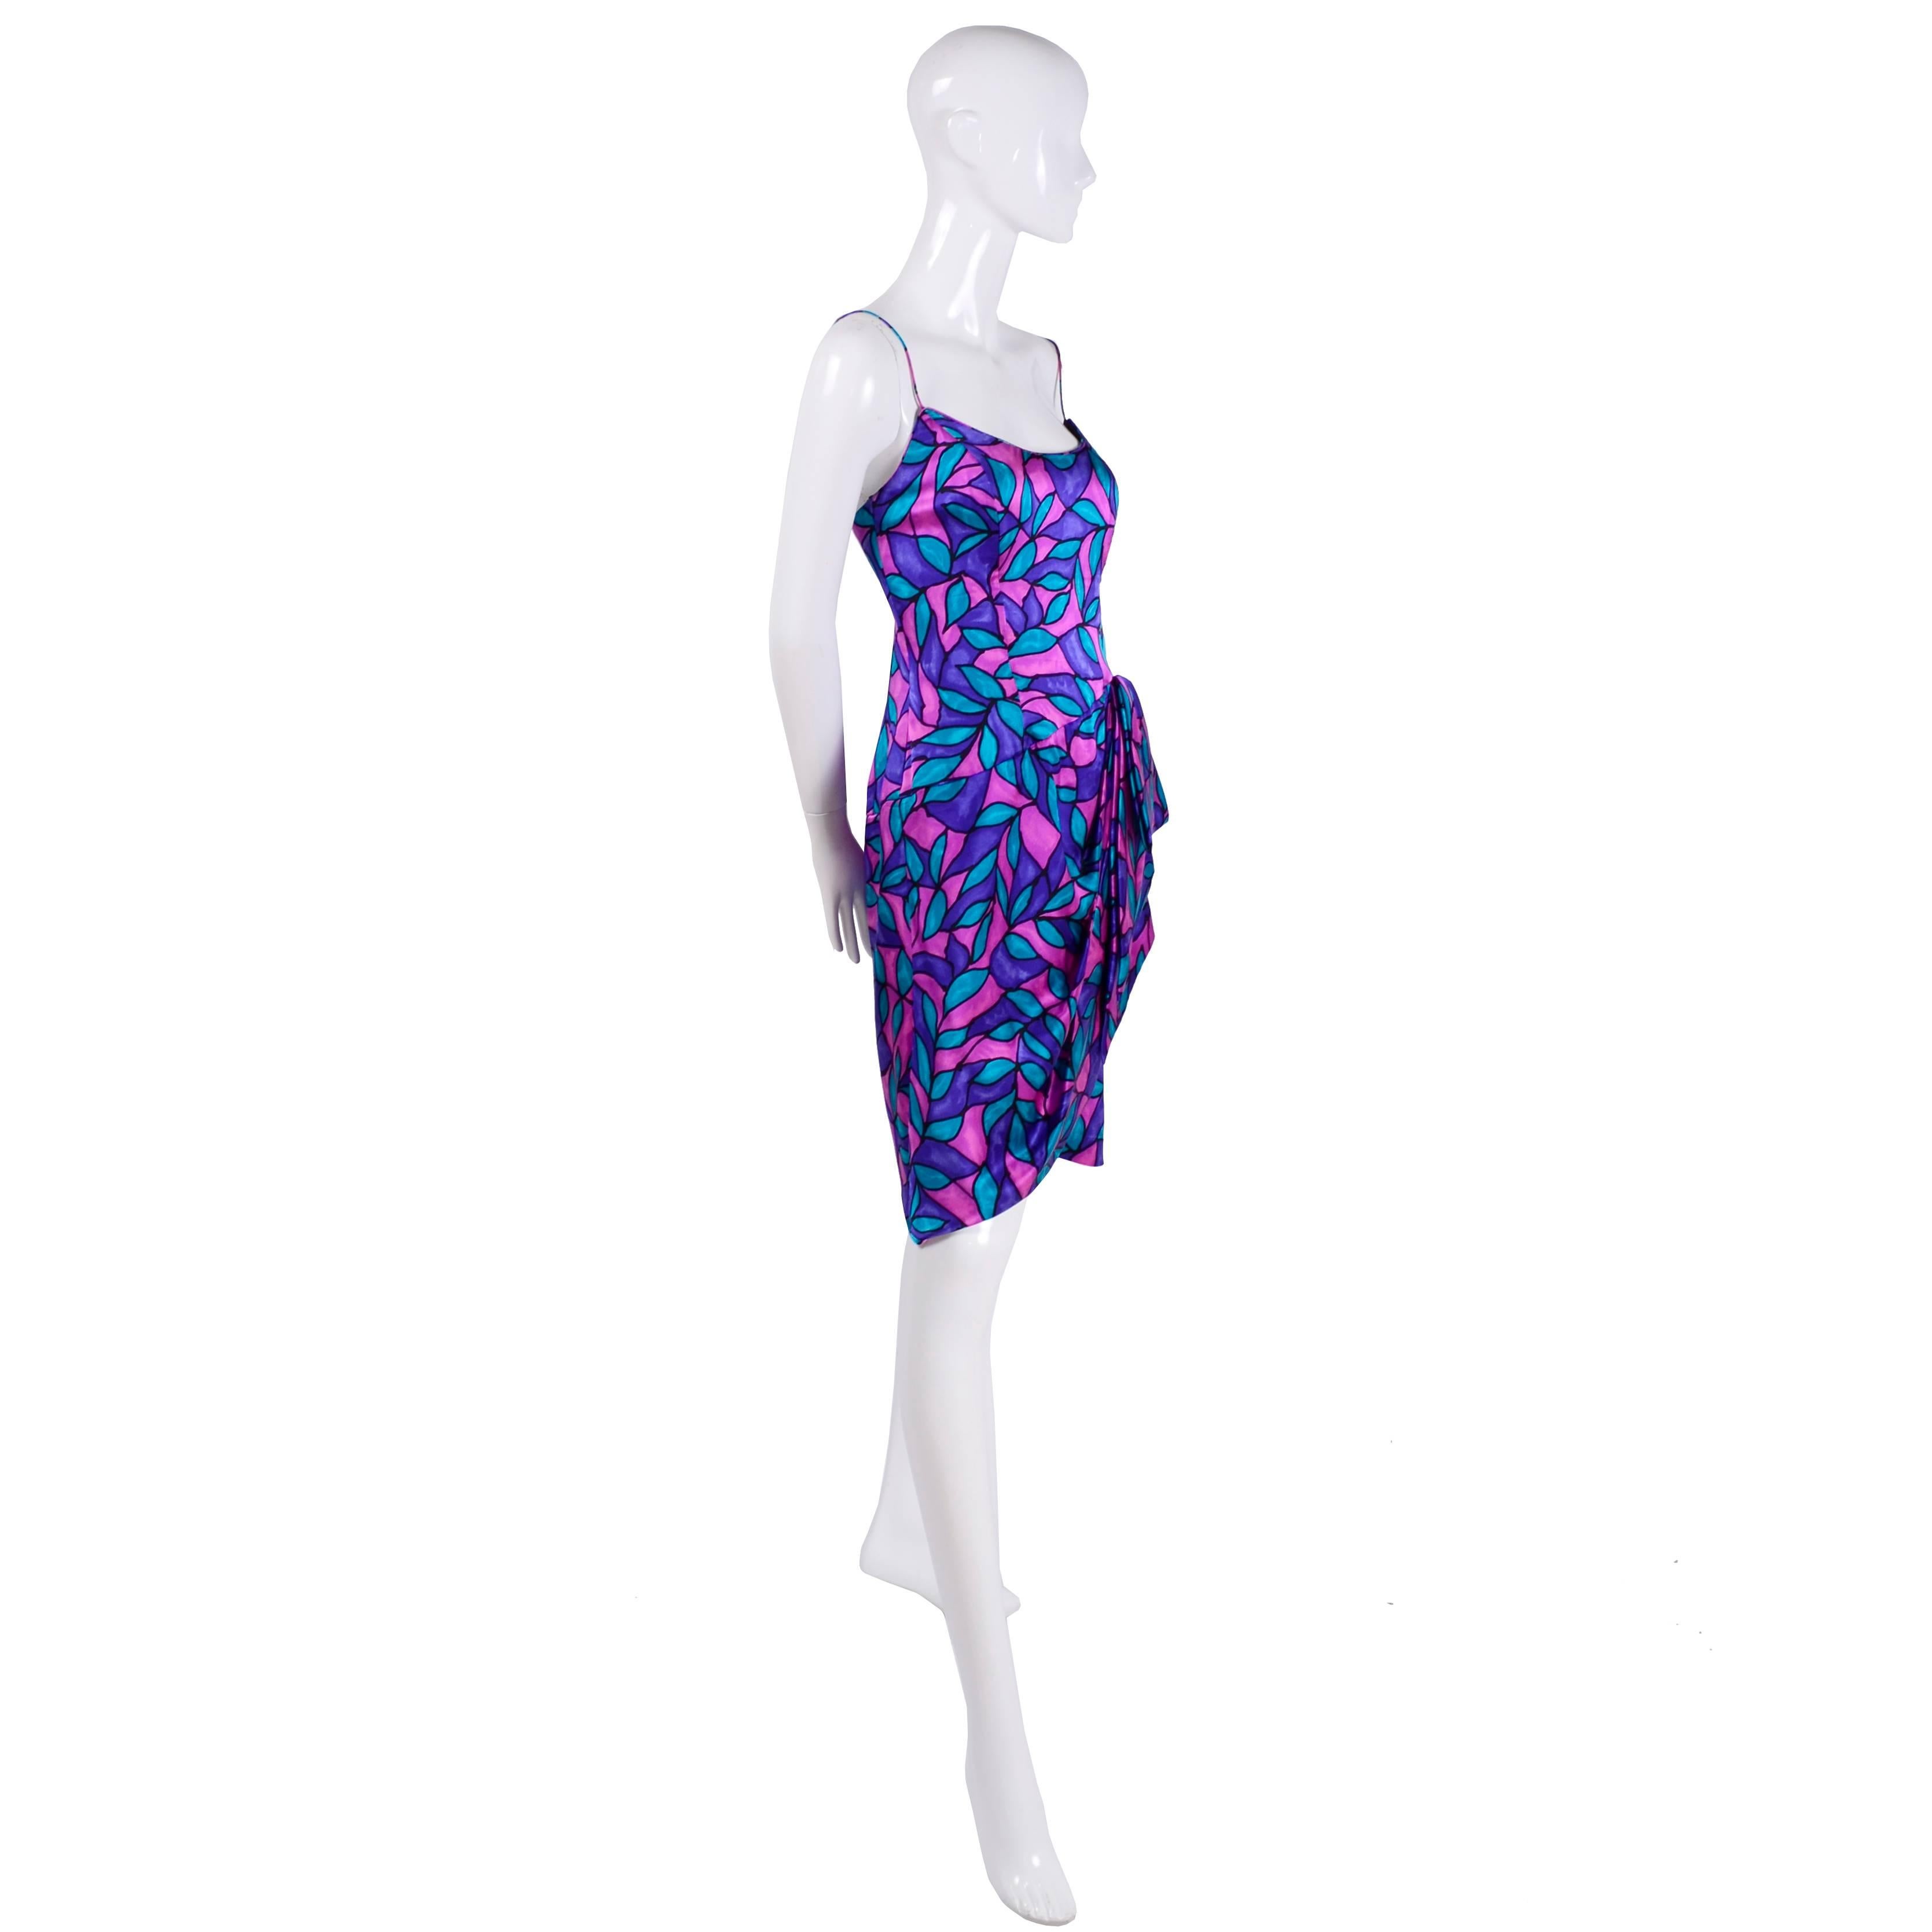 This colorful vintage silk dress was made by AJ Bari in the 1980’s. The 80's were definitely back on the runways in designer collections for 2018/19 and we think this dress fits perfectly into that trend with its hemline and side drape. The purple,